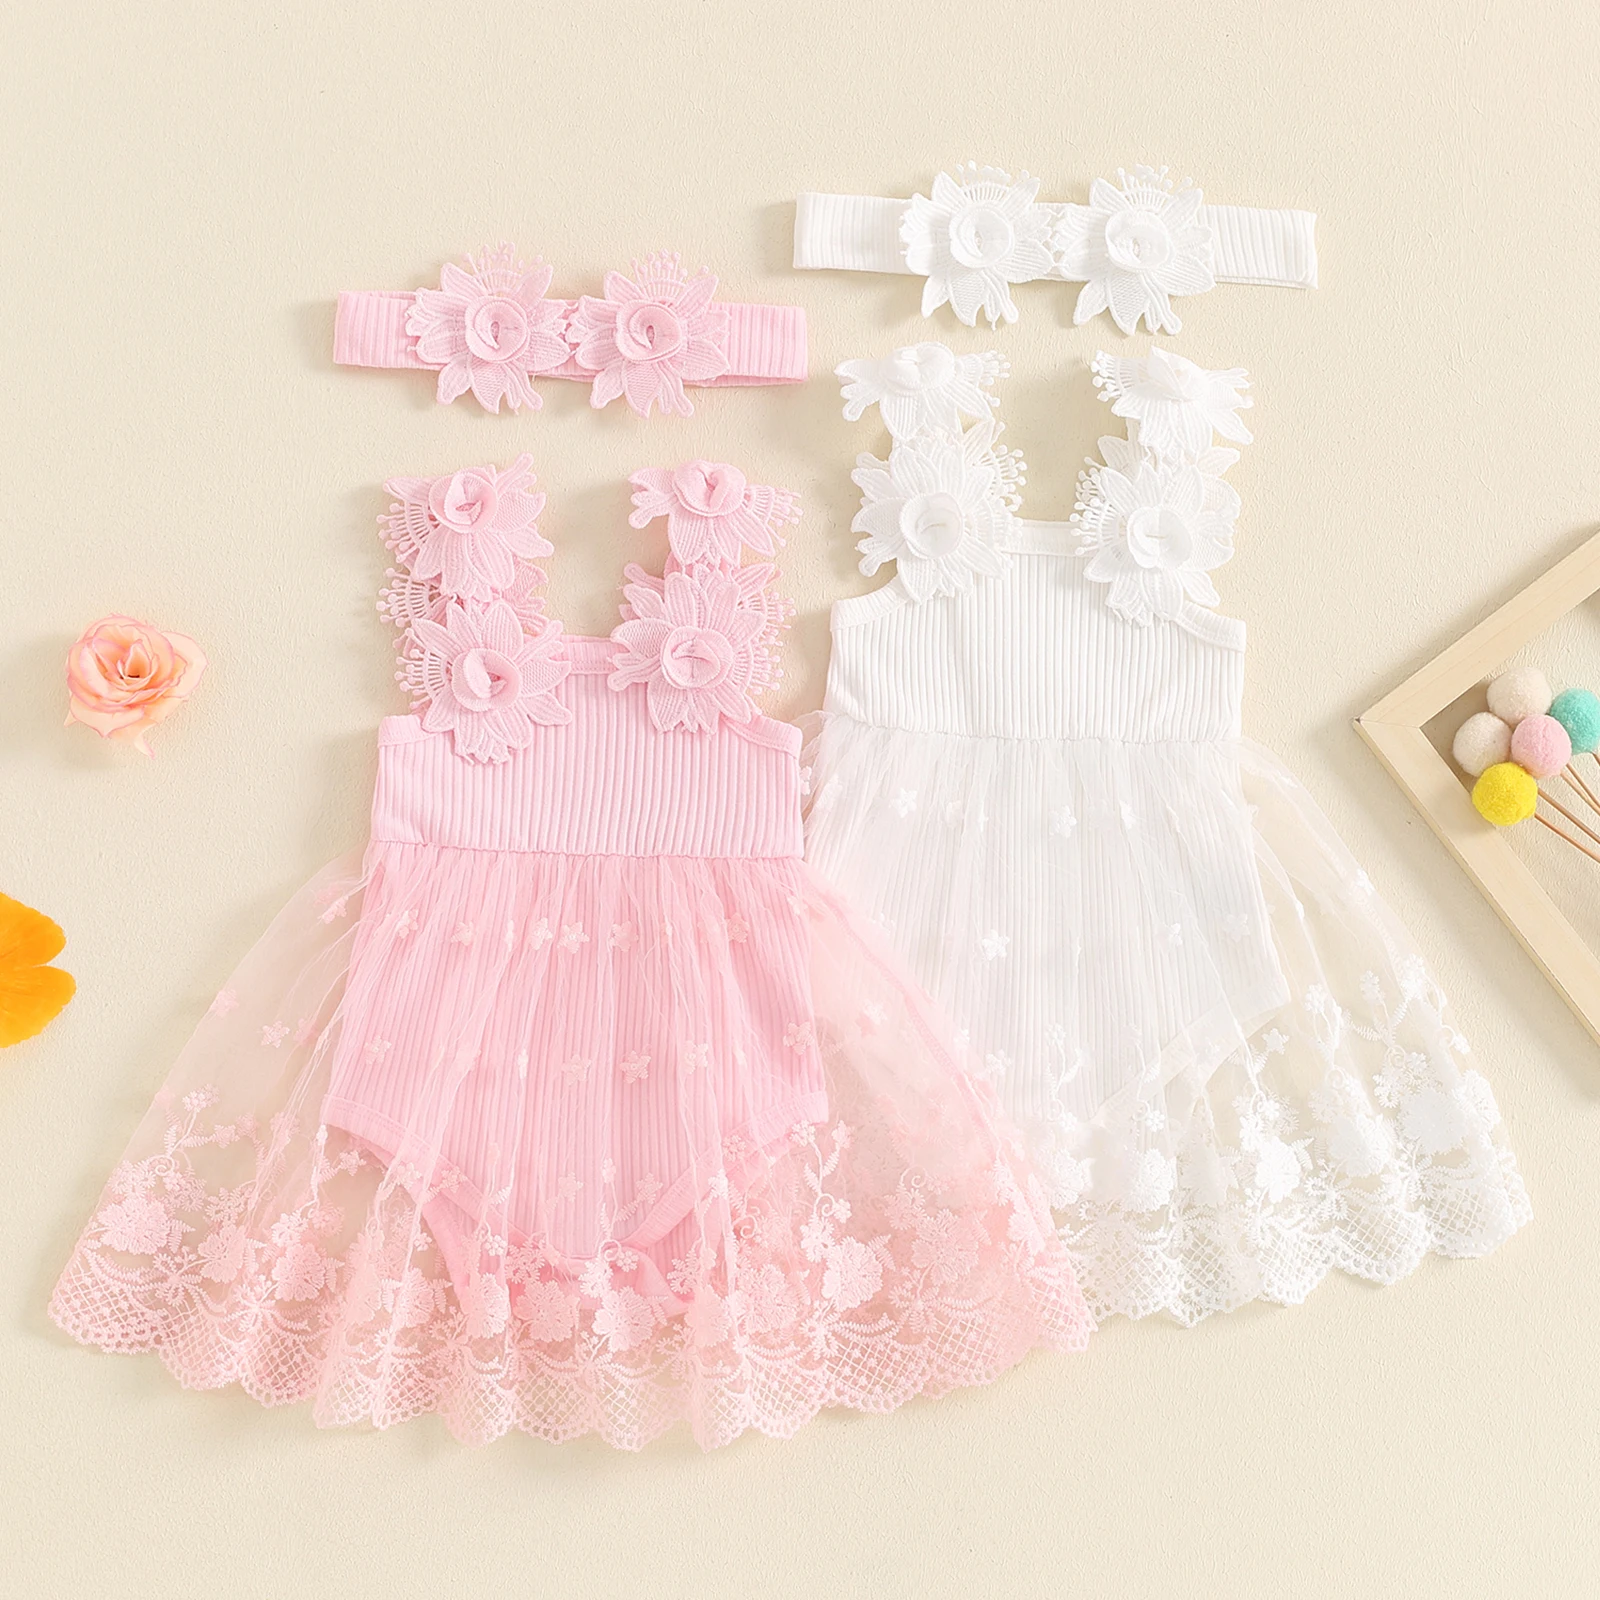 

0-24M Toddler Baby Girl Summer Romper Dress Casual Floral Embroidery Sleeveless Jumpsuit and Headband Set Cute Clothes Outfits